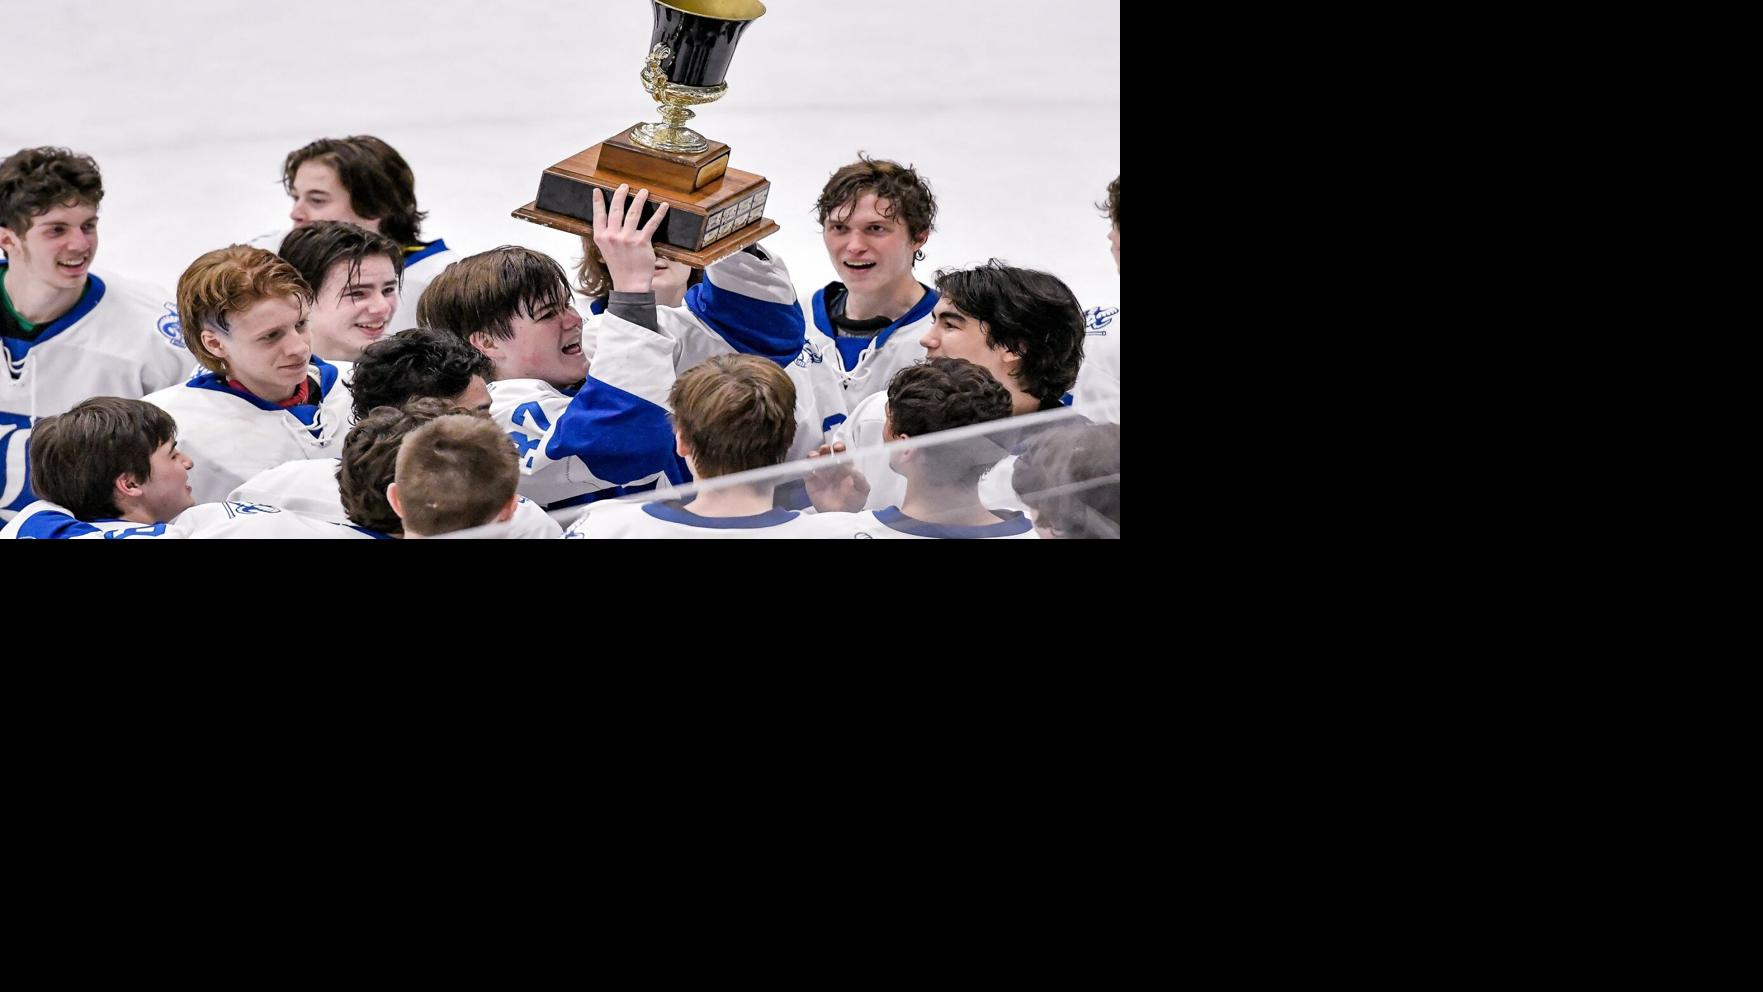 Mid-States Wickenheiser Cup final: Ladue 2, Francis Howell Central 1